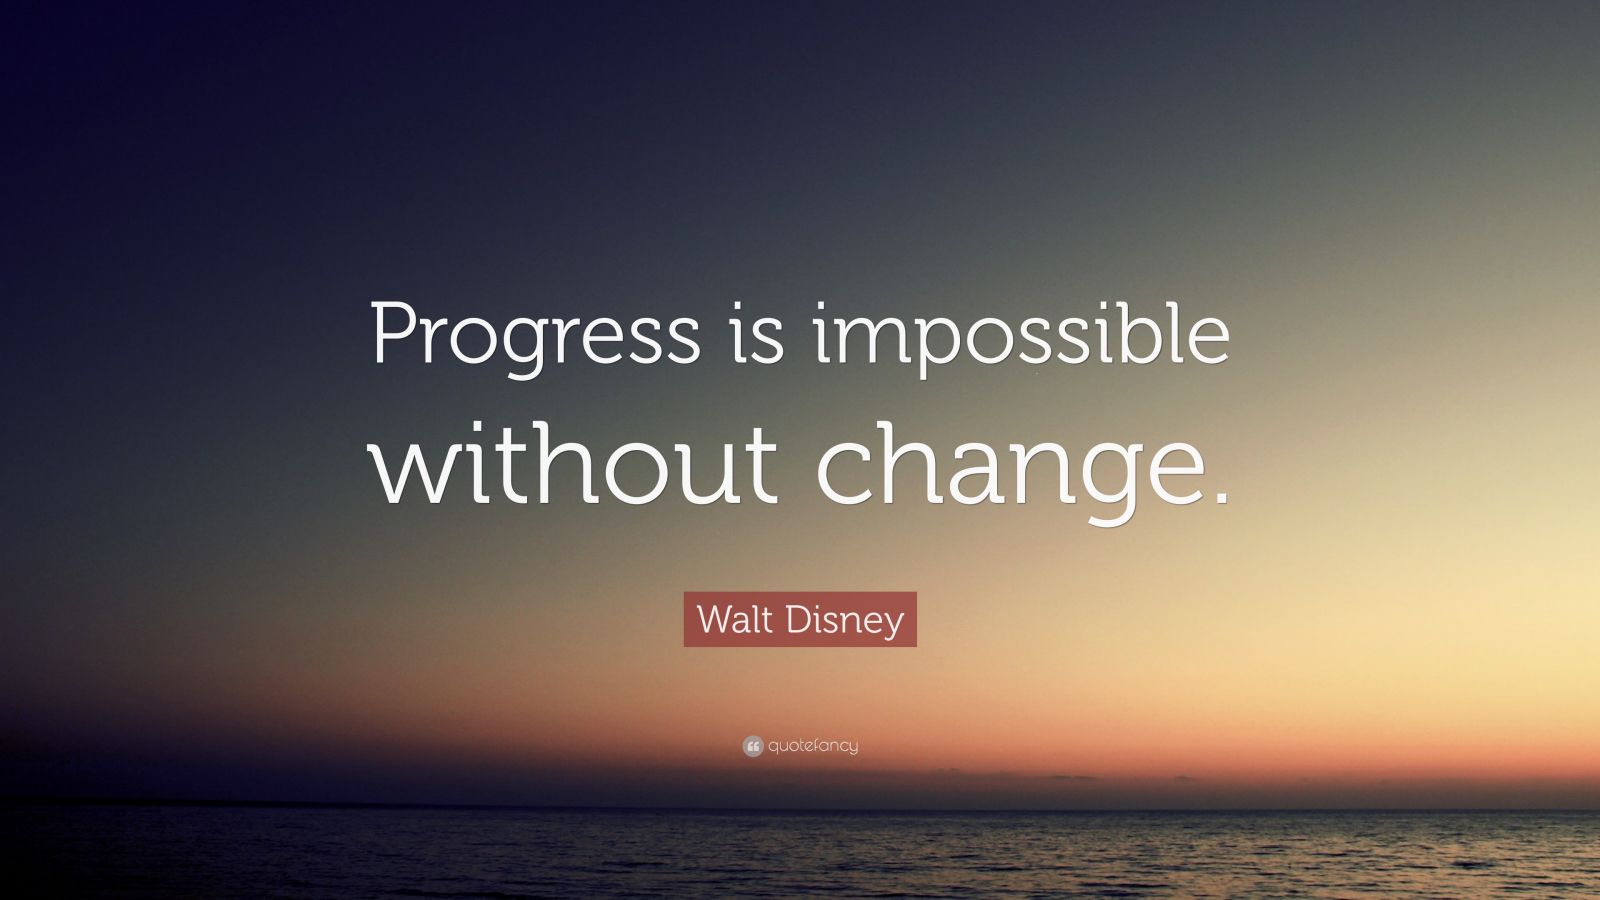 essay on progress is impossible without change